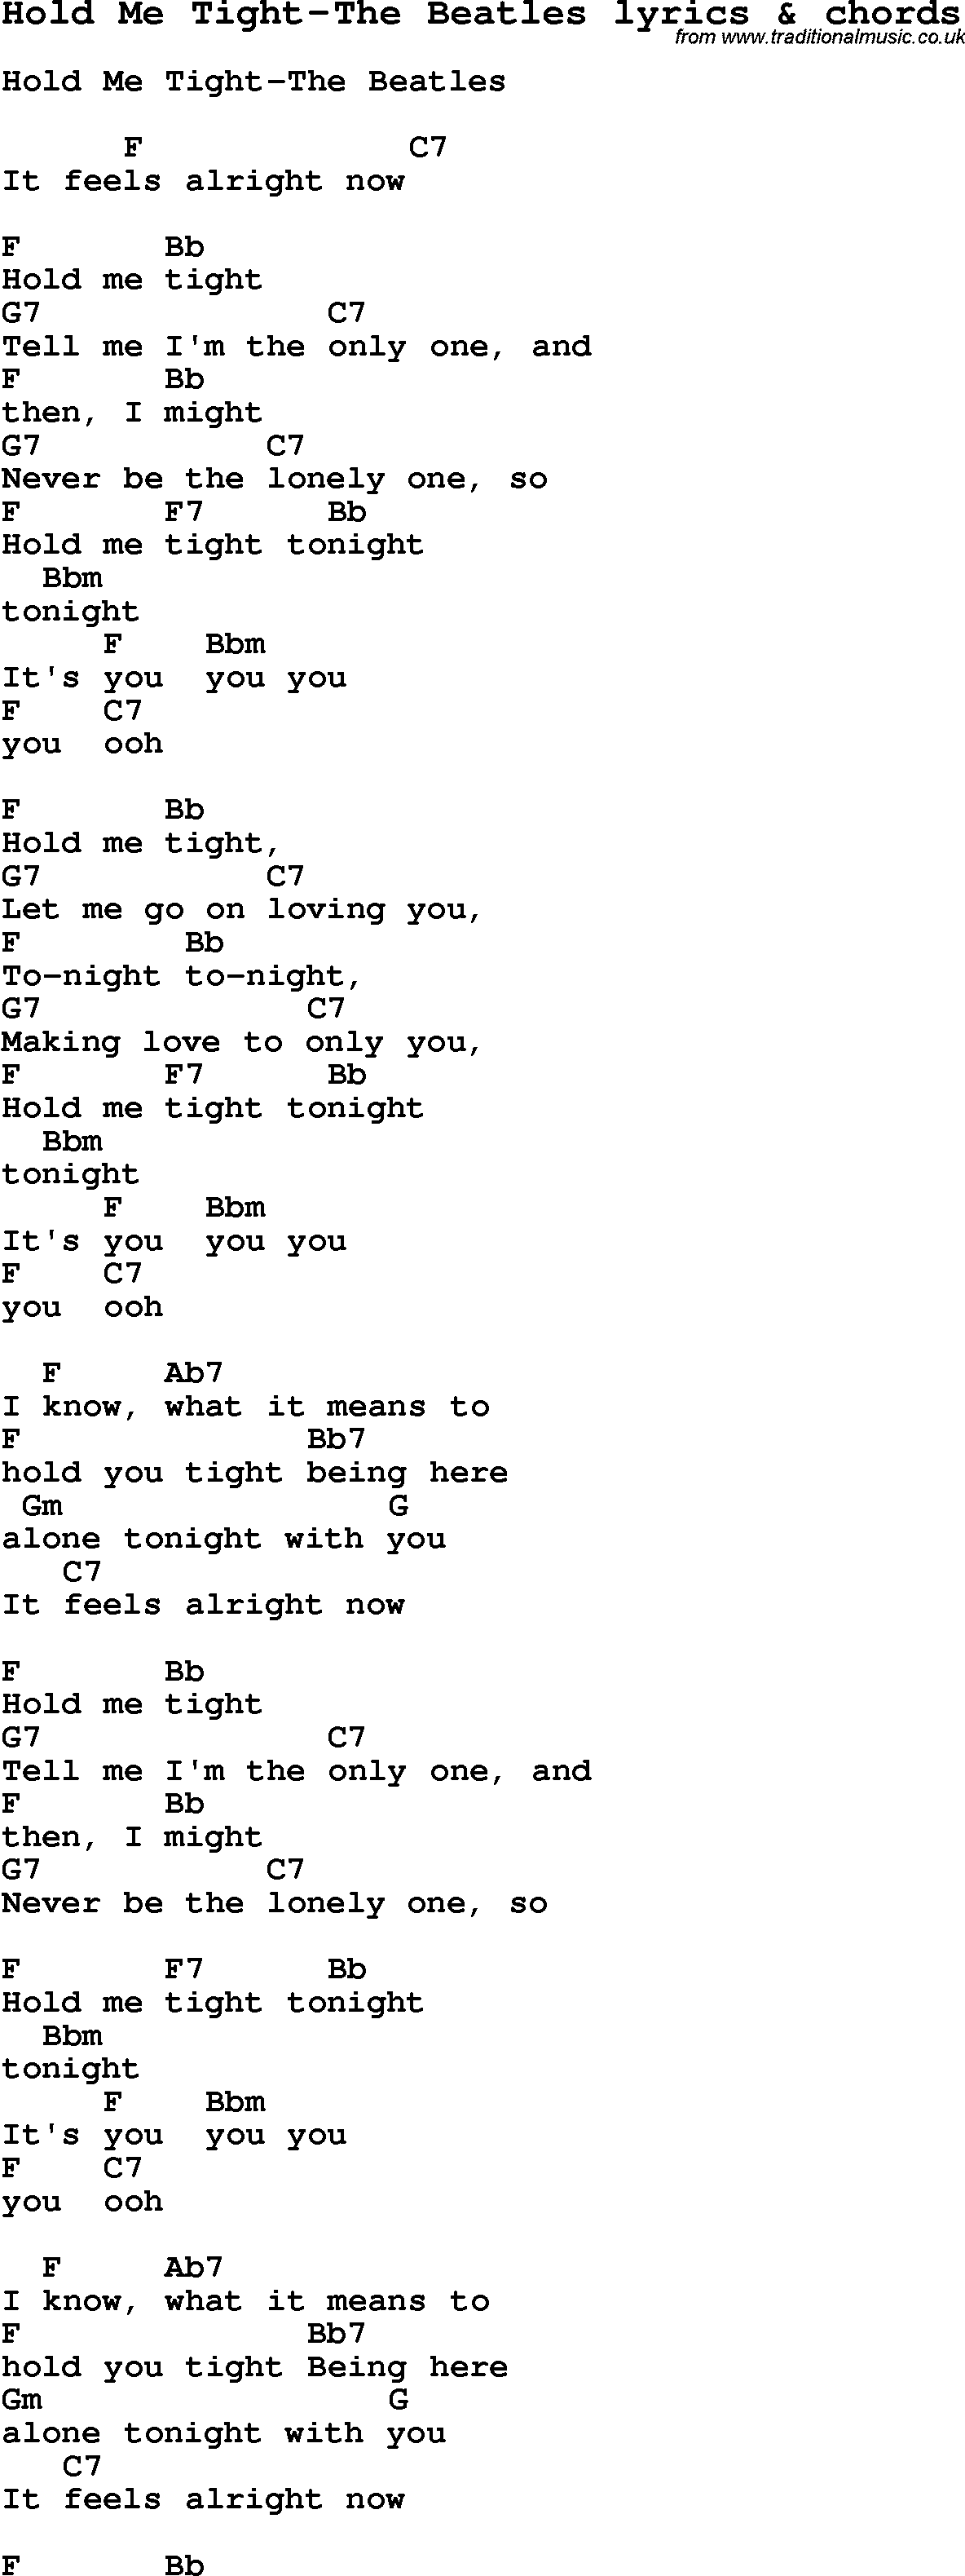 Love Song Lyrics for:Hold Me Tight-The Beatles with chords.